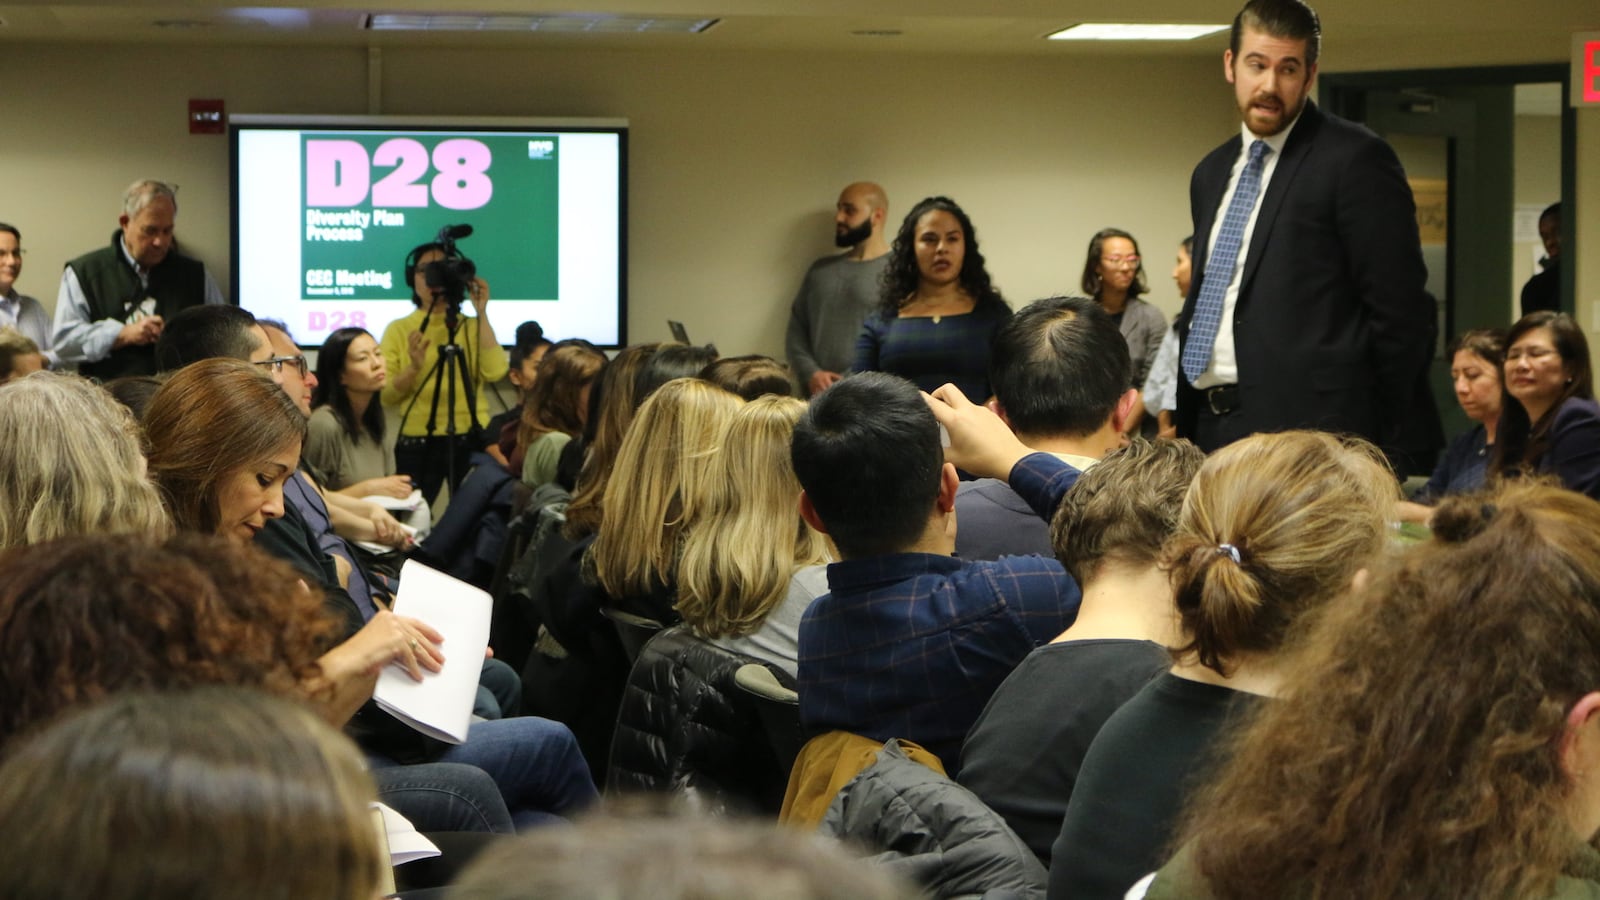 Education department officials took questions from parents regarding plans to integrate middle schools at a Community Education Council District 28 meeting in December 2019.